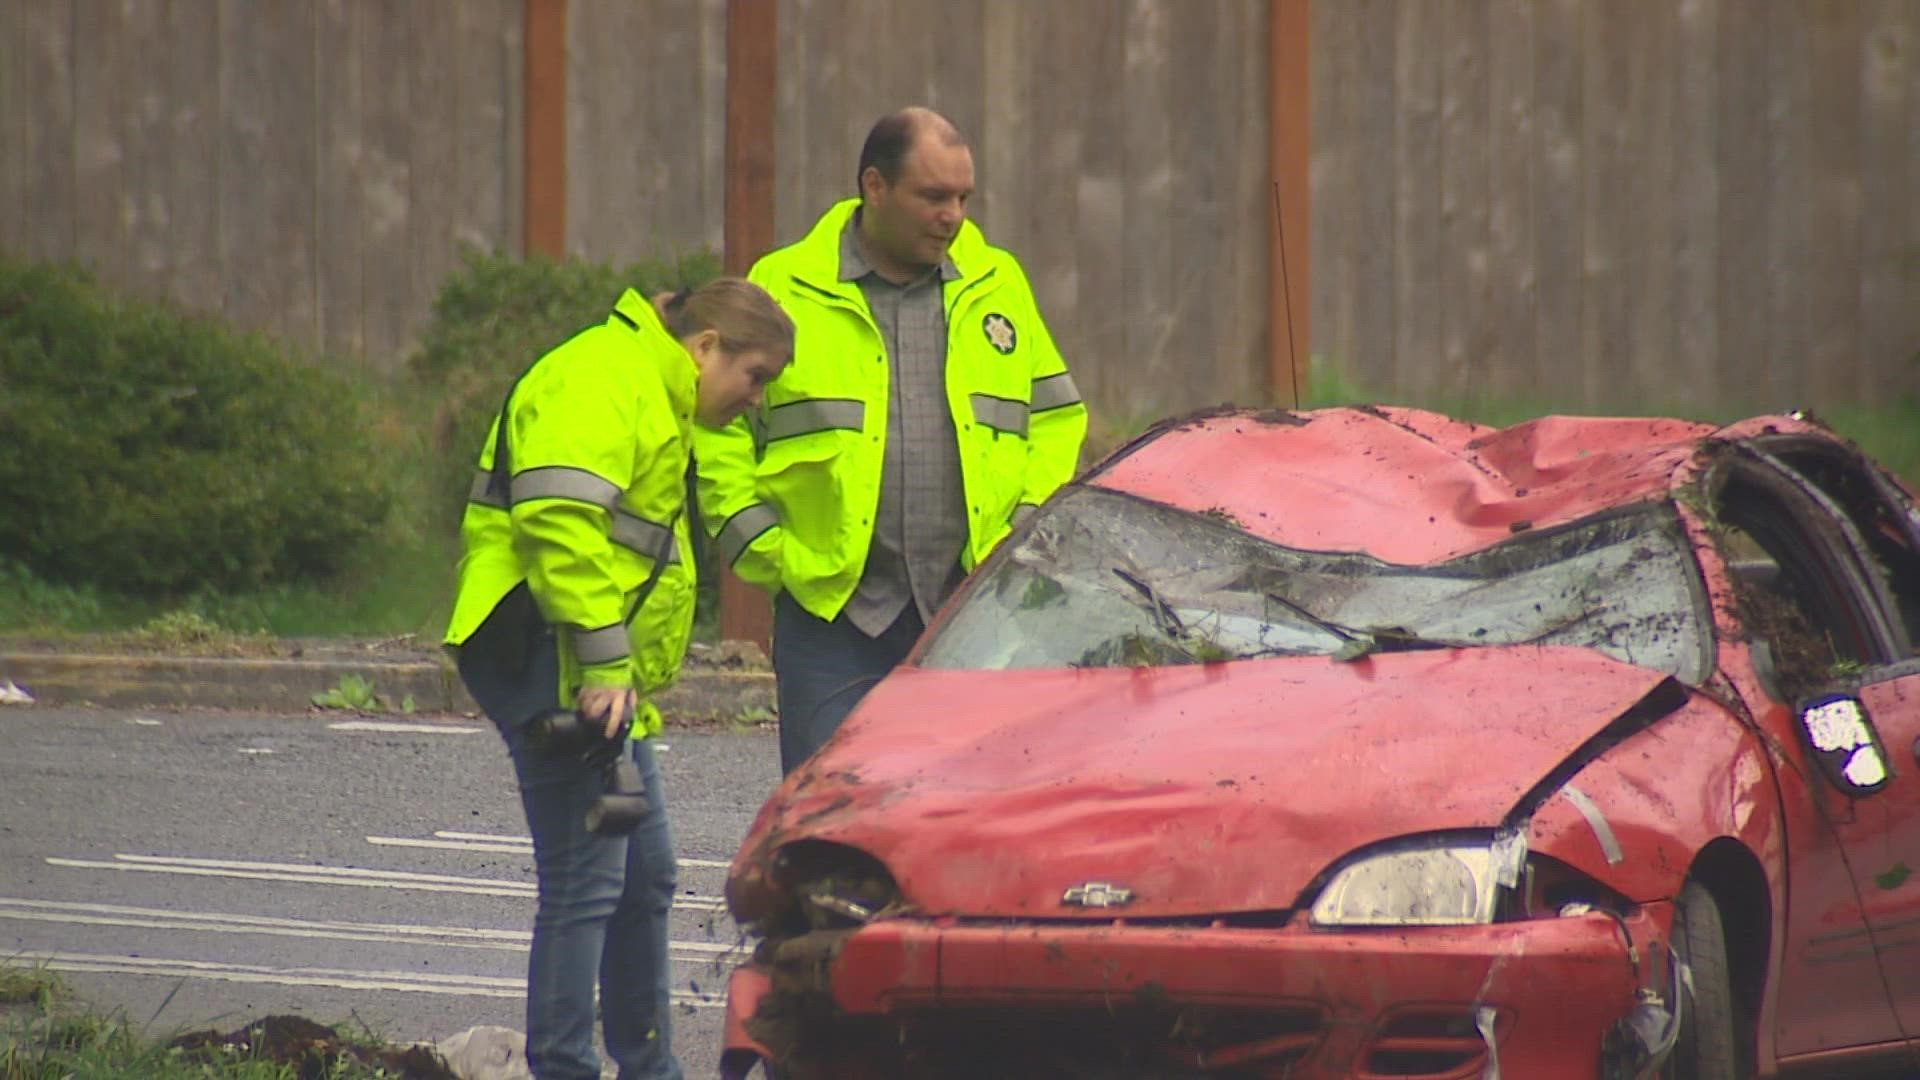 Three juvenile suspects were detained for questioning after a carjacking that ended in Burien when the vehicle crashed Wednesday afternoon.